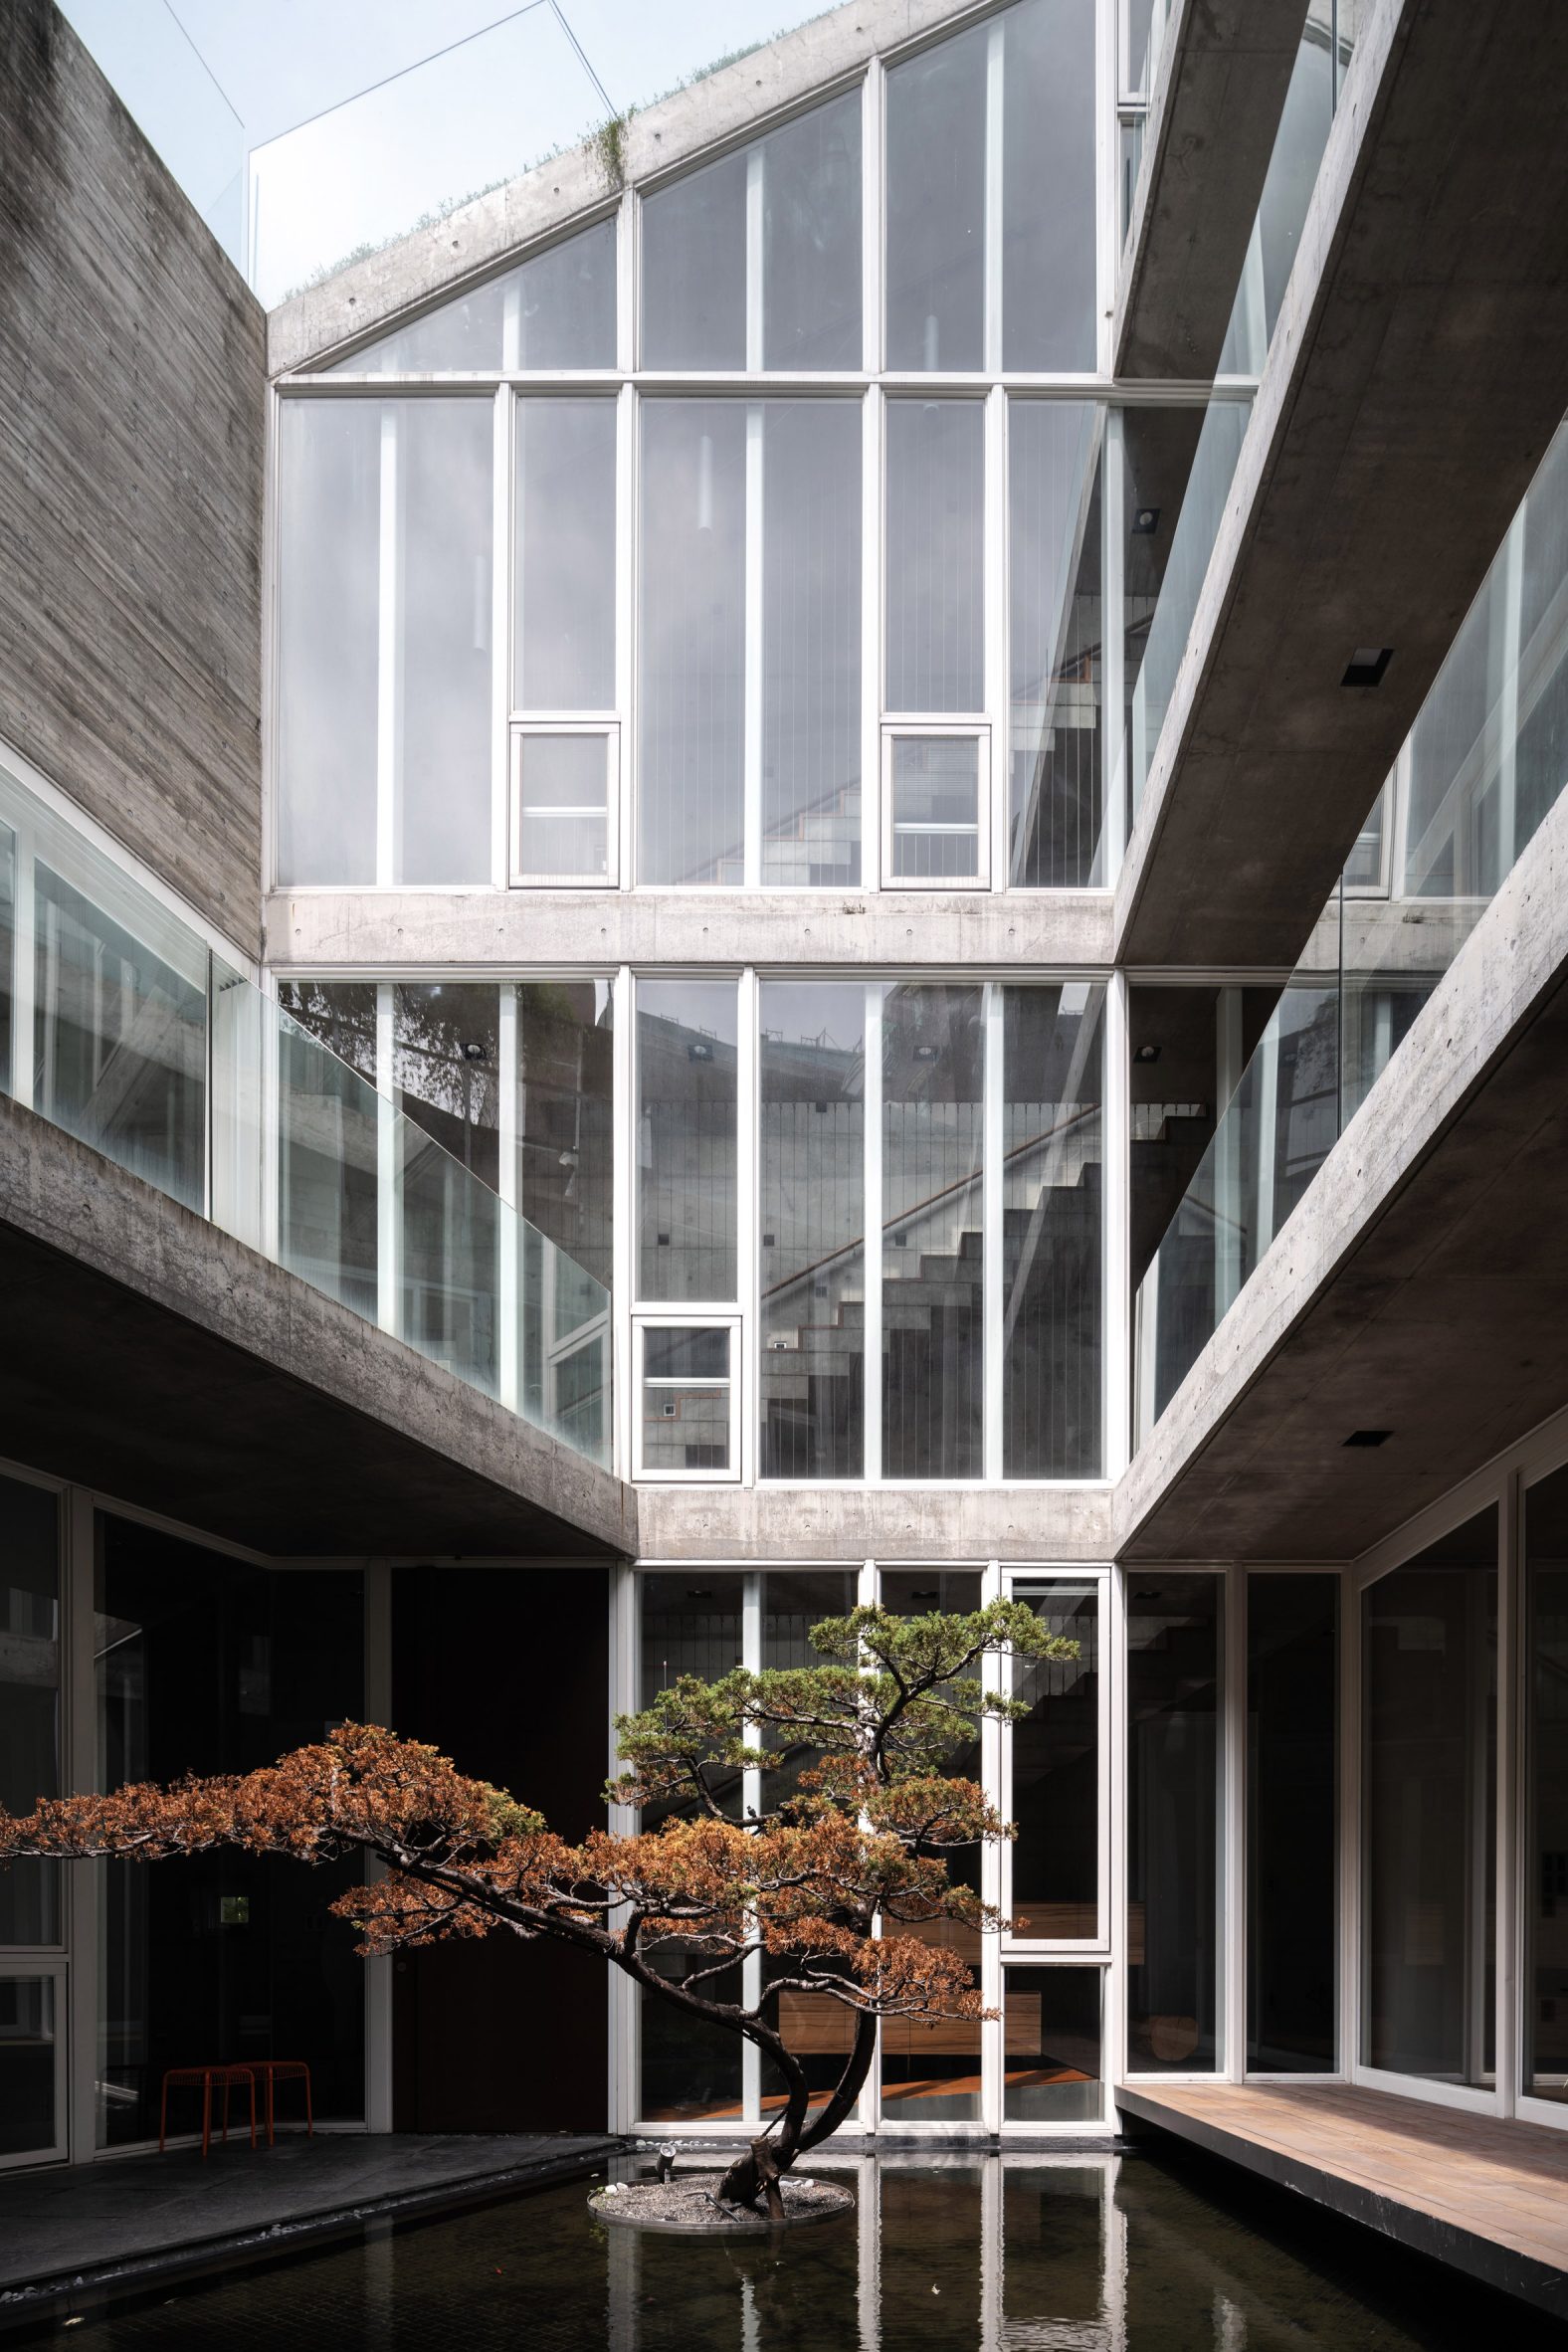 Glazed walls of a concrete building with an outdoor courtyard at the centre